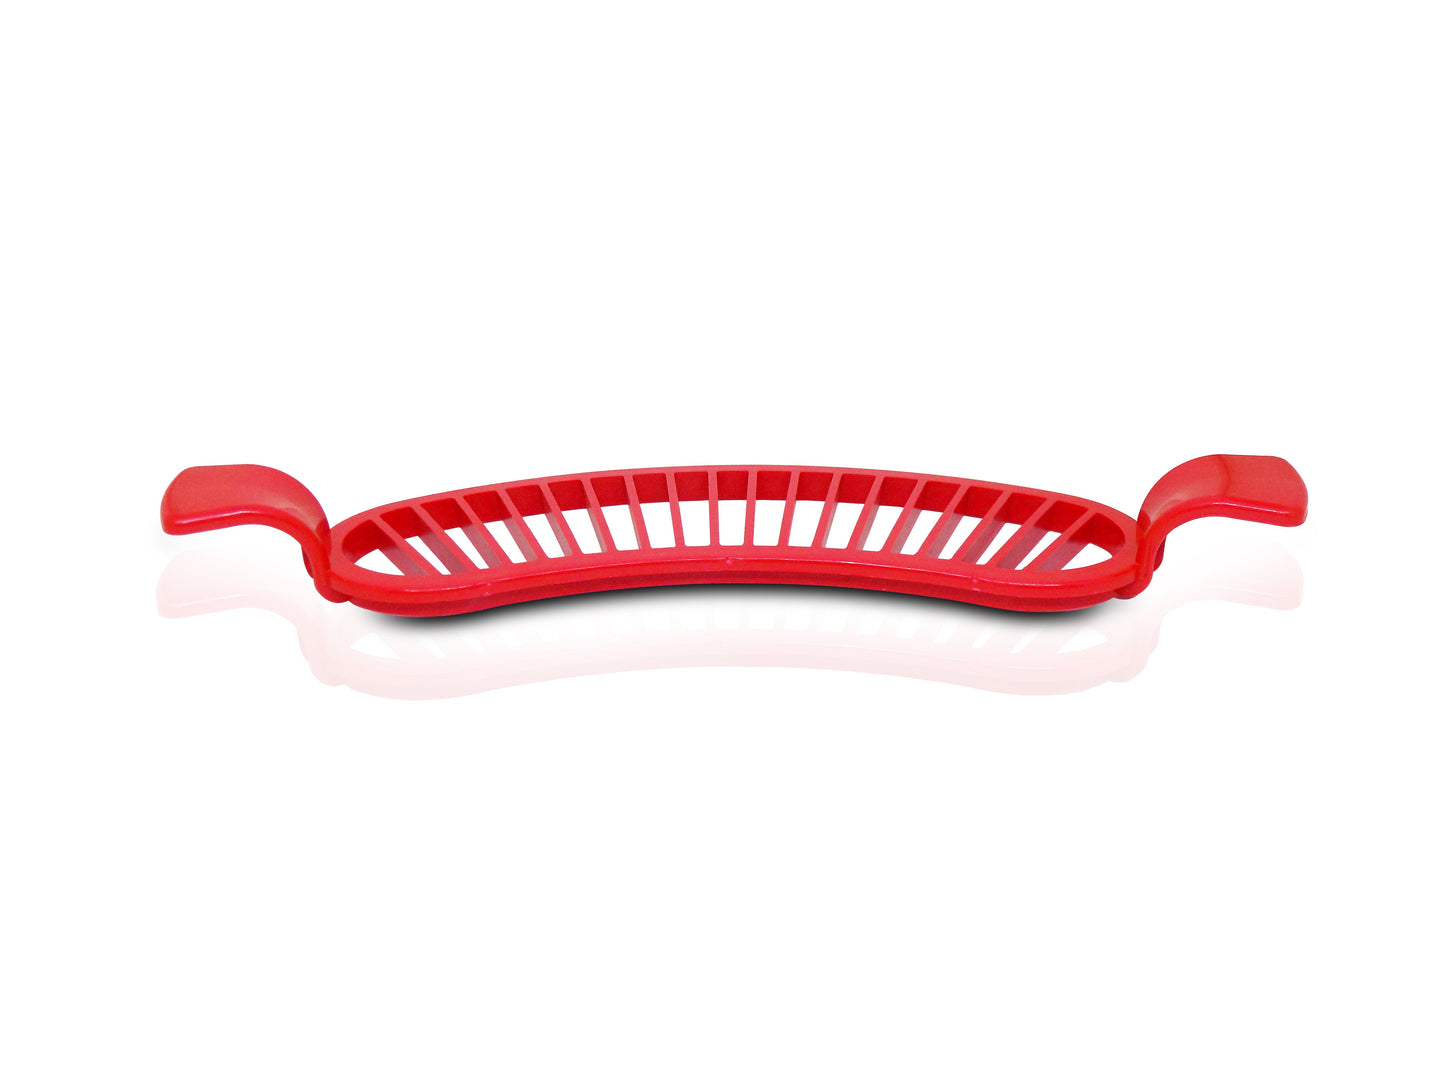 Plastic Banana Slicer/Cutter With Handle